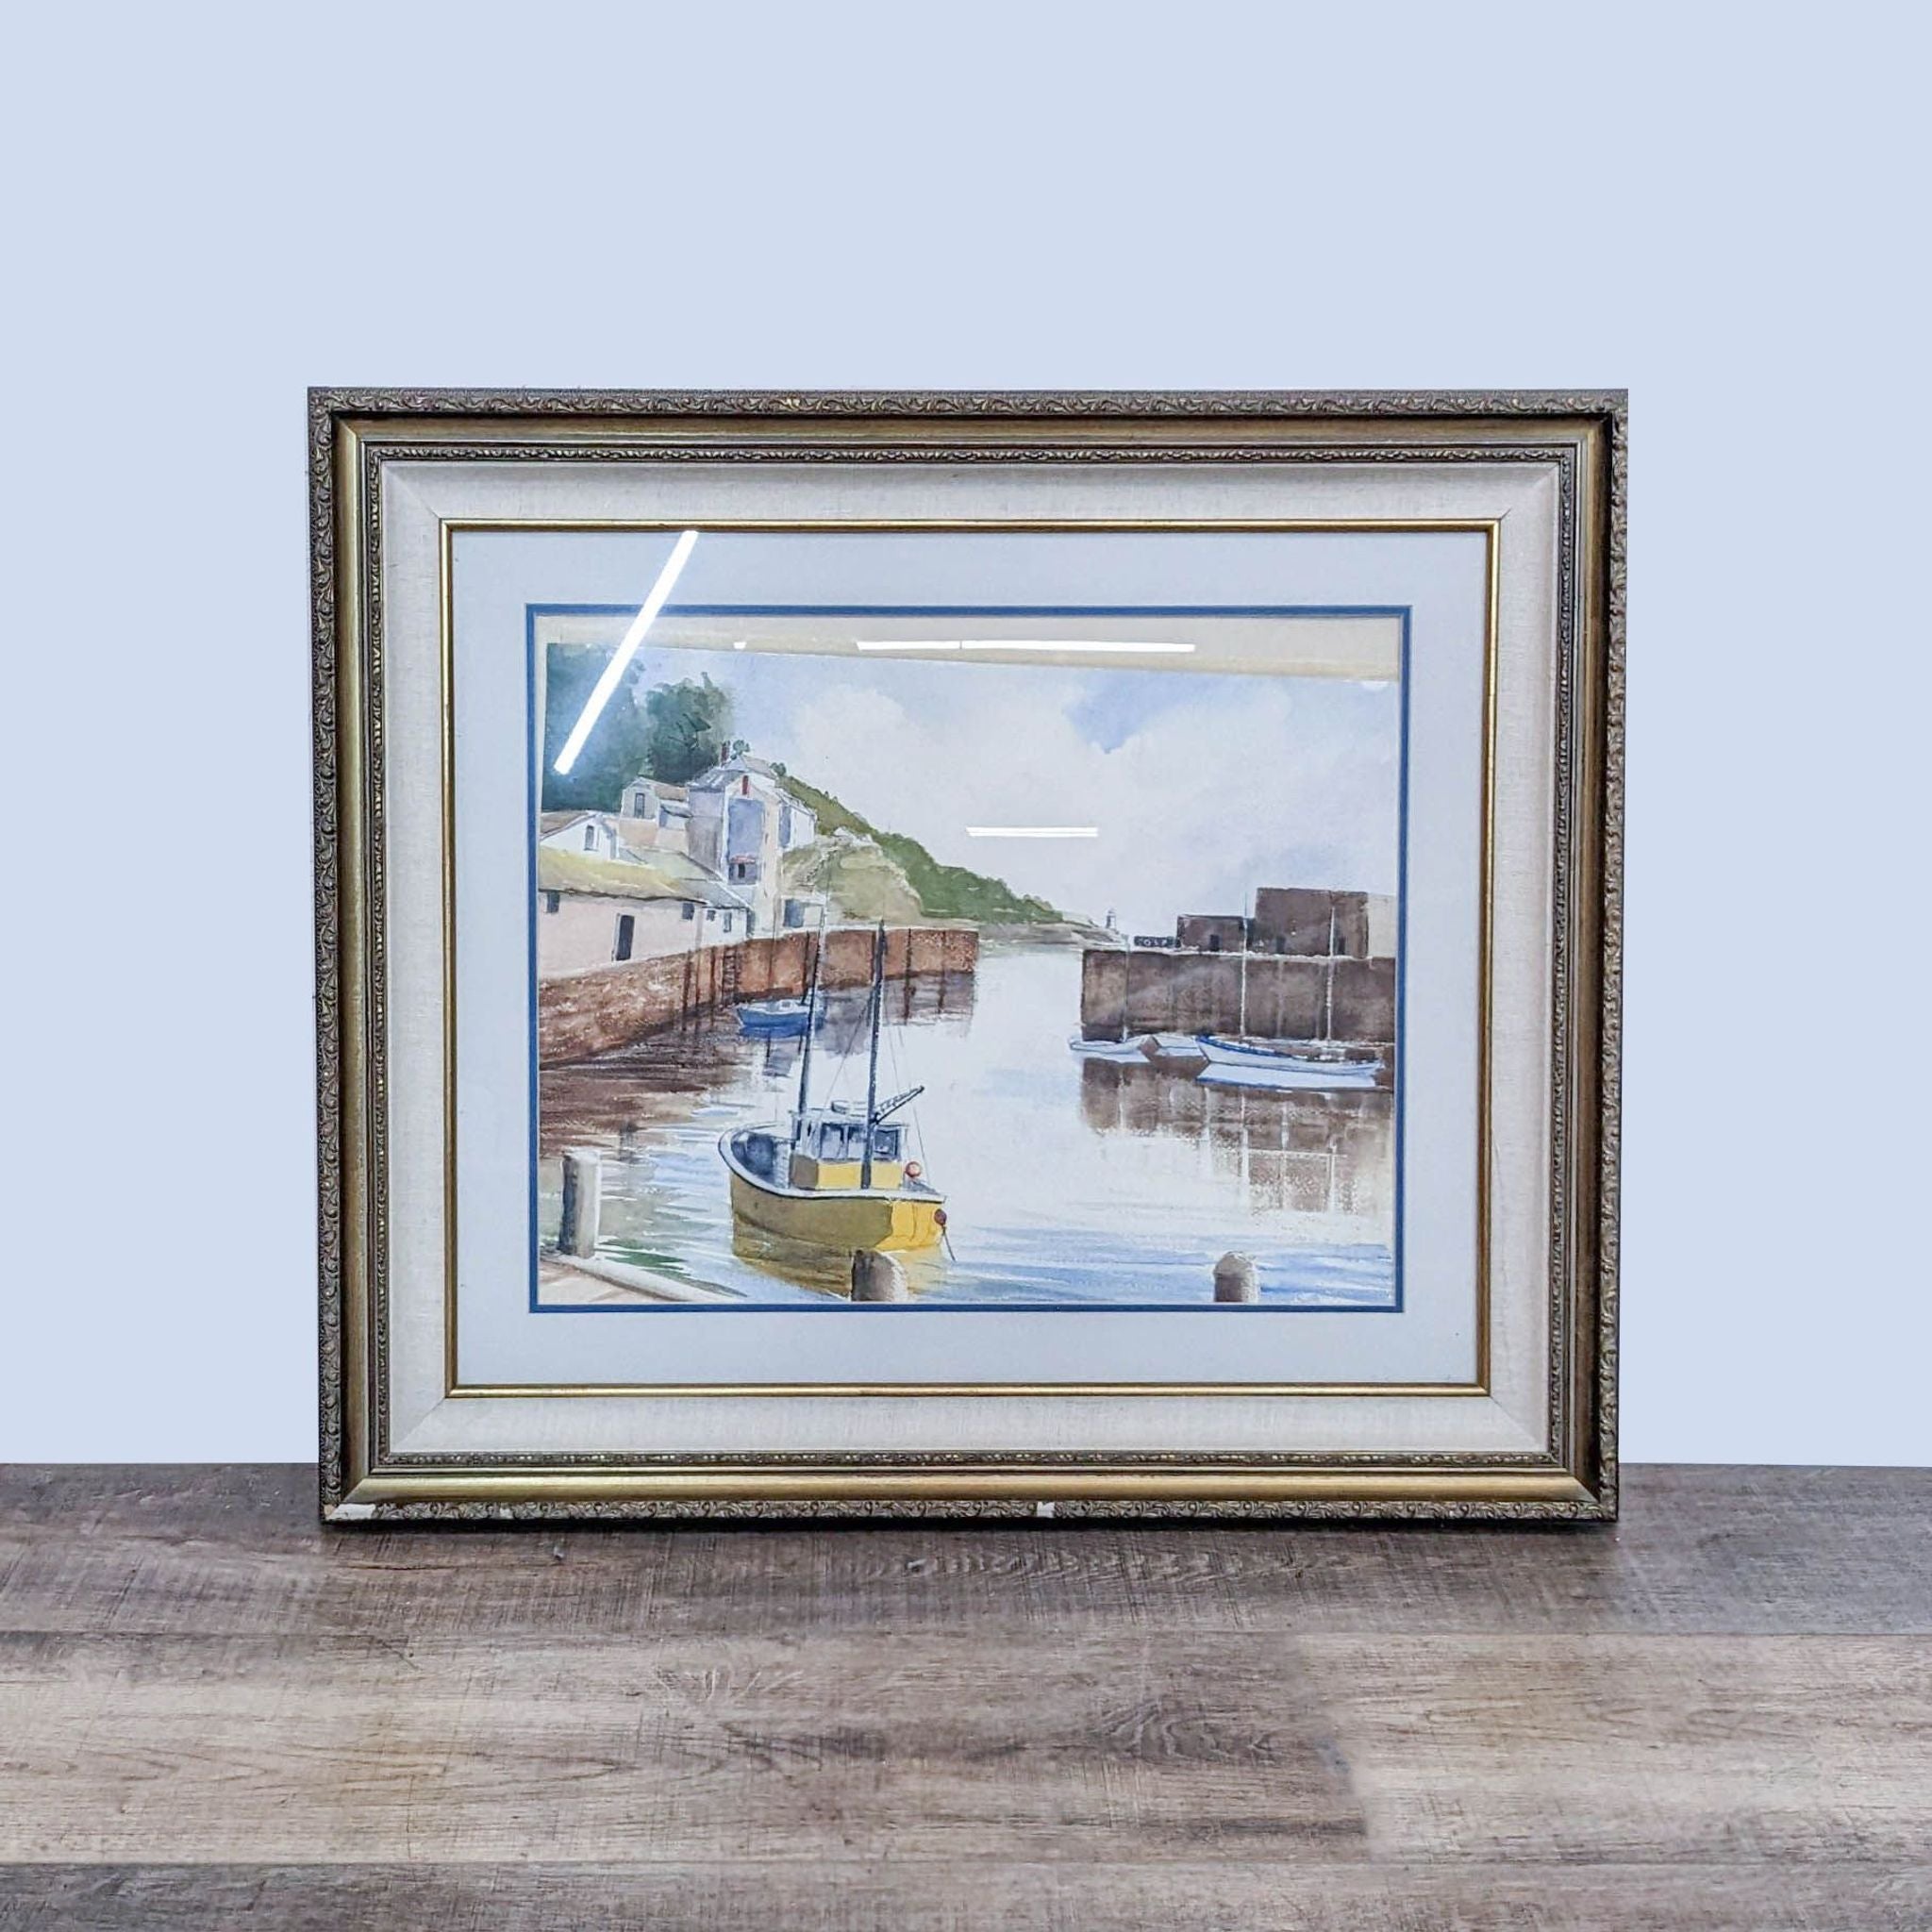 Watercolor print of a yellow sailboat in a canal, matted and framed, by Reperch from Fisher Galleries.